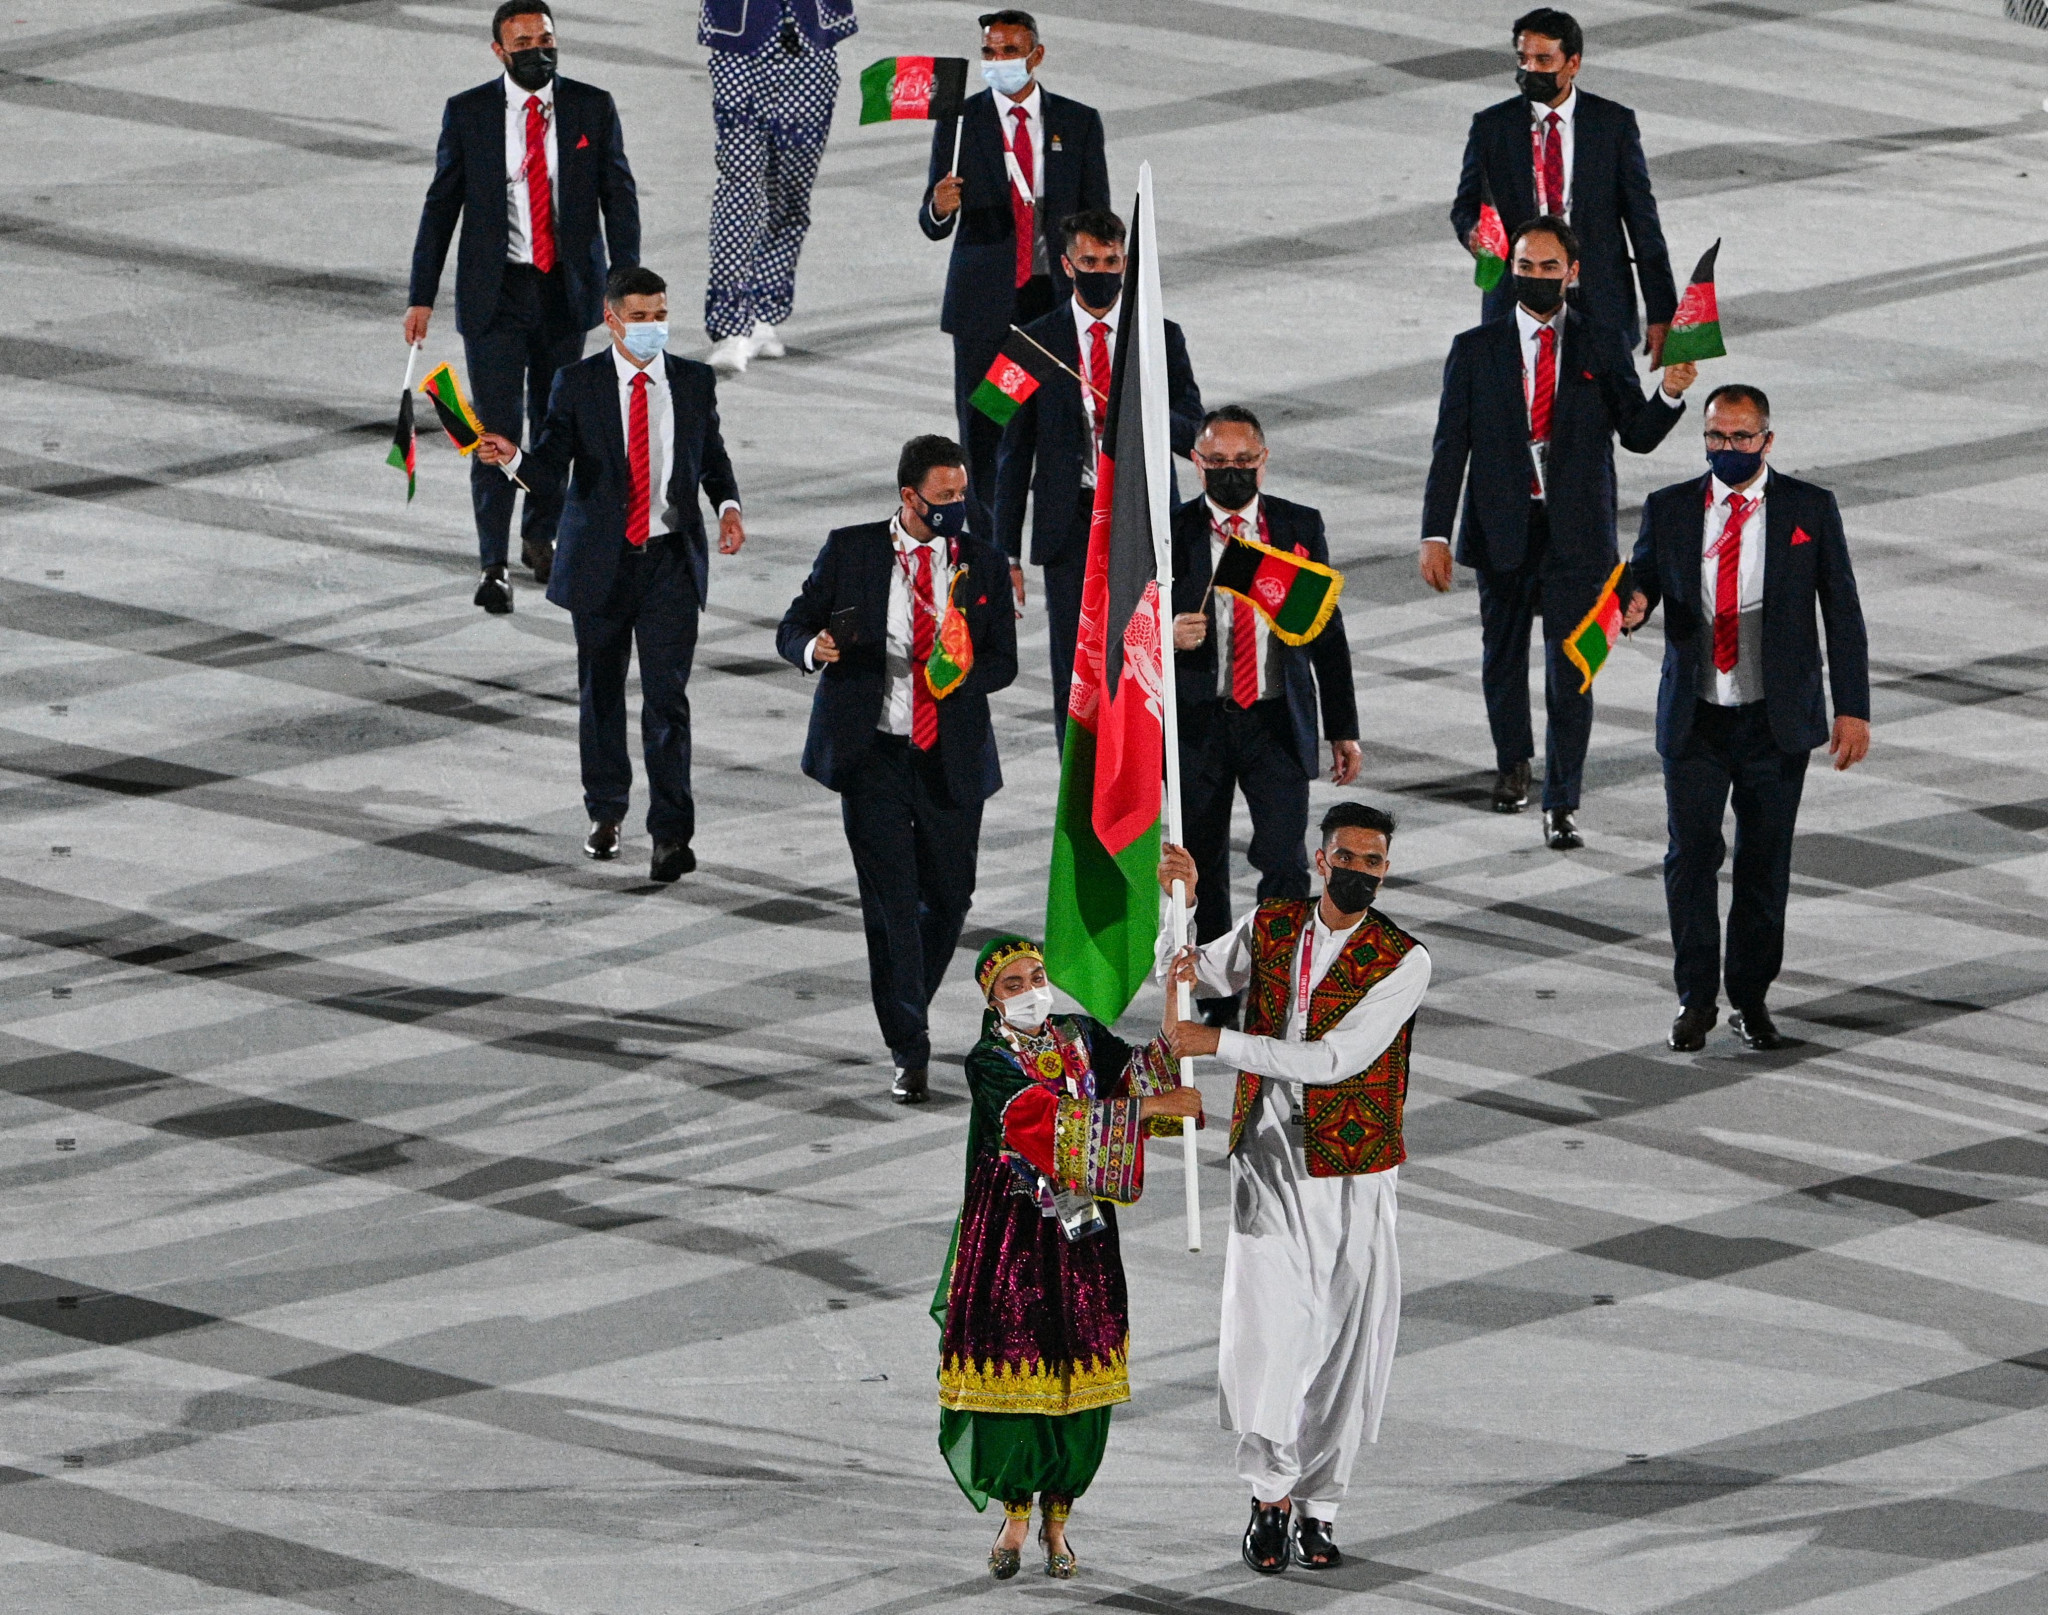 Afghanistan’s Paris 2024 place undecided as IOC calls for "significant